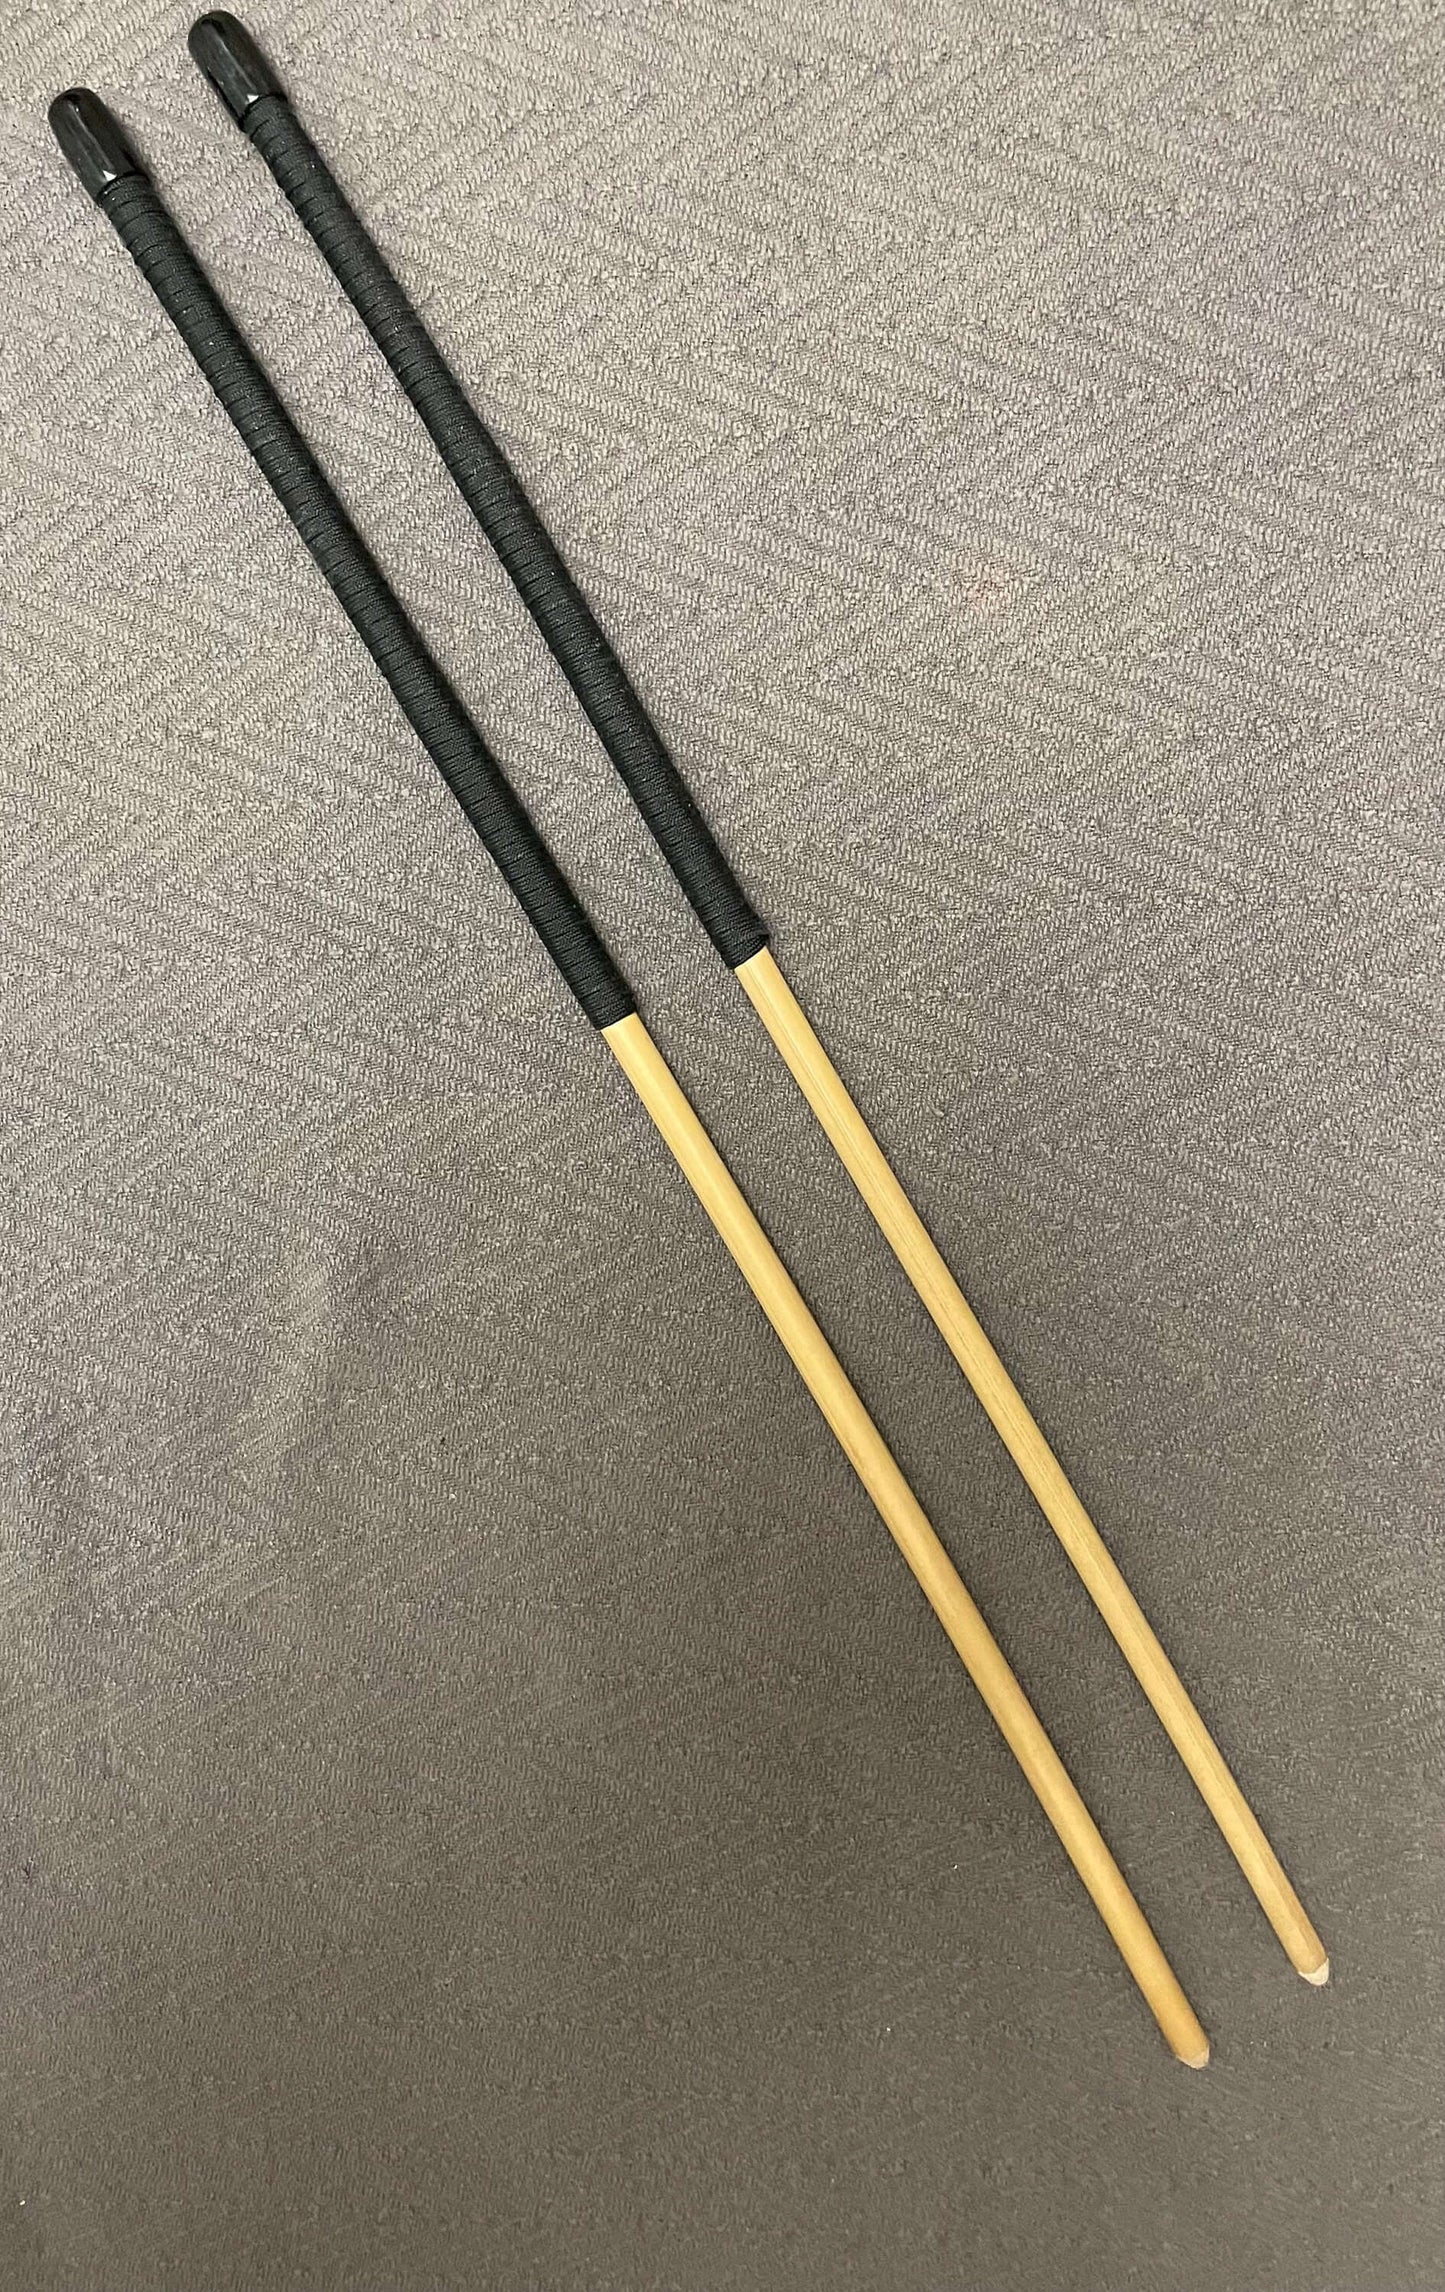 OTK Dragon Cane Pair - 55 to 58 cms with Black Paracord Handles